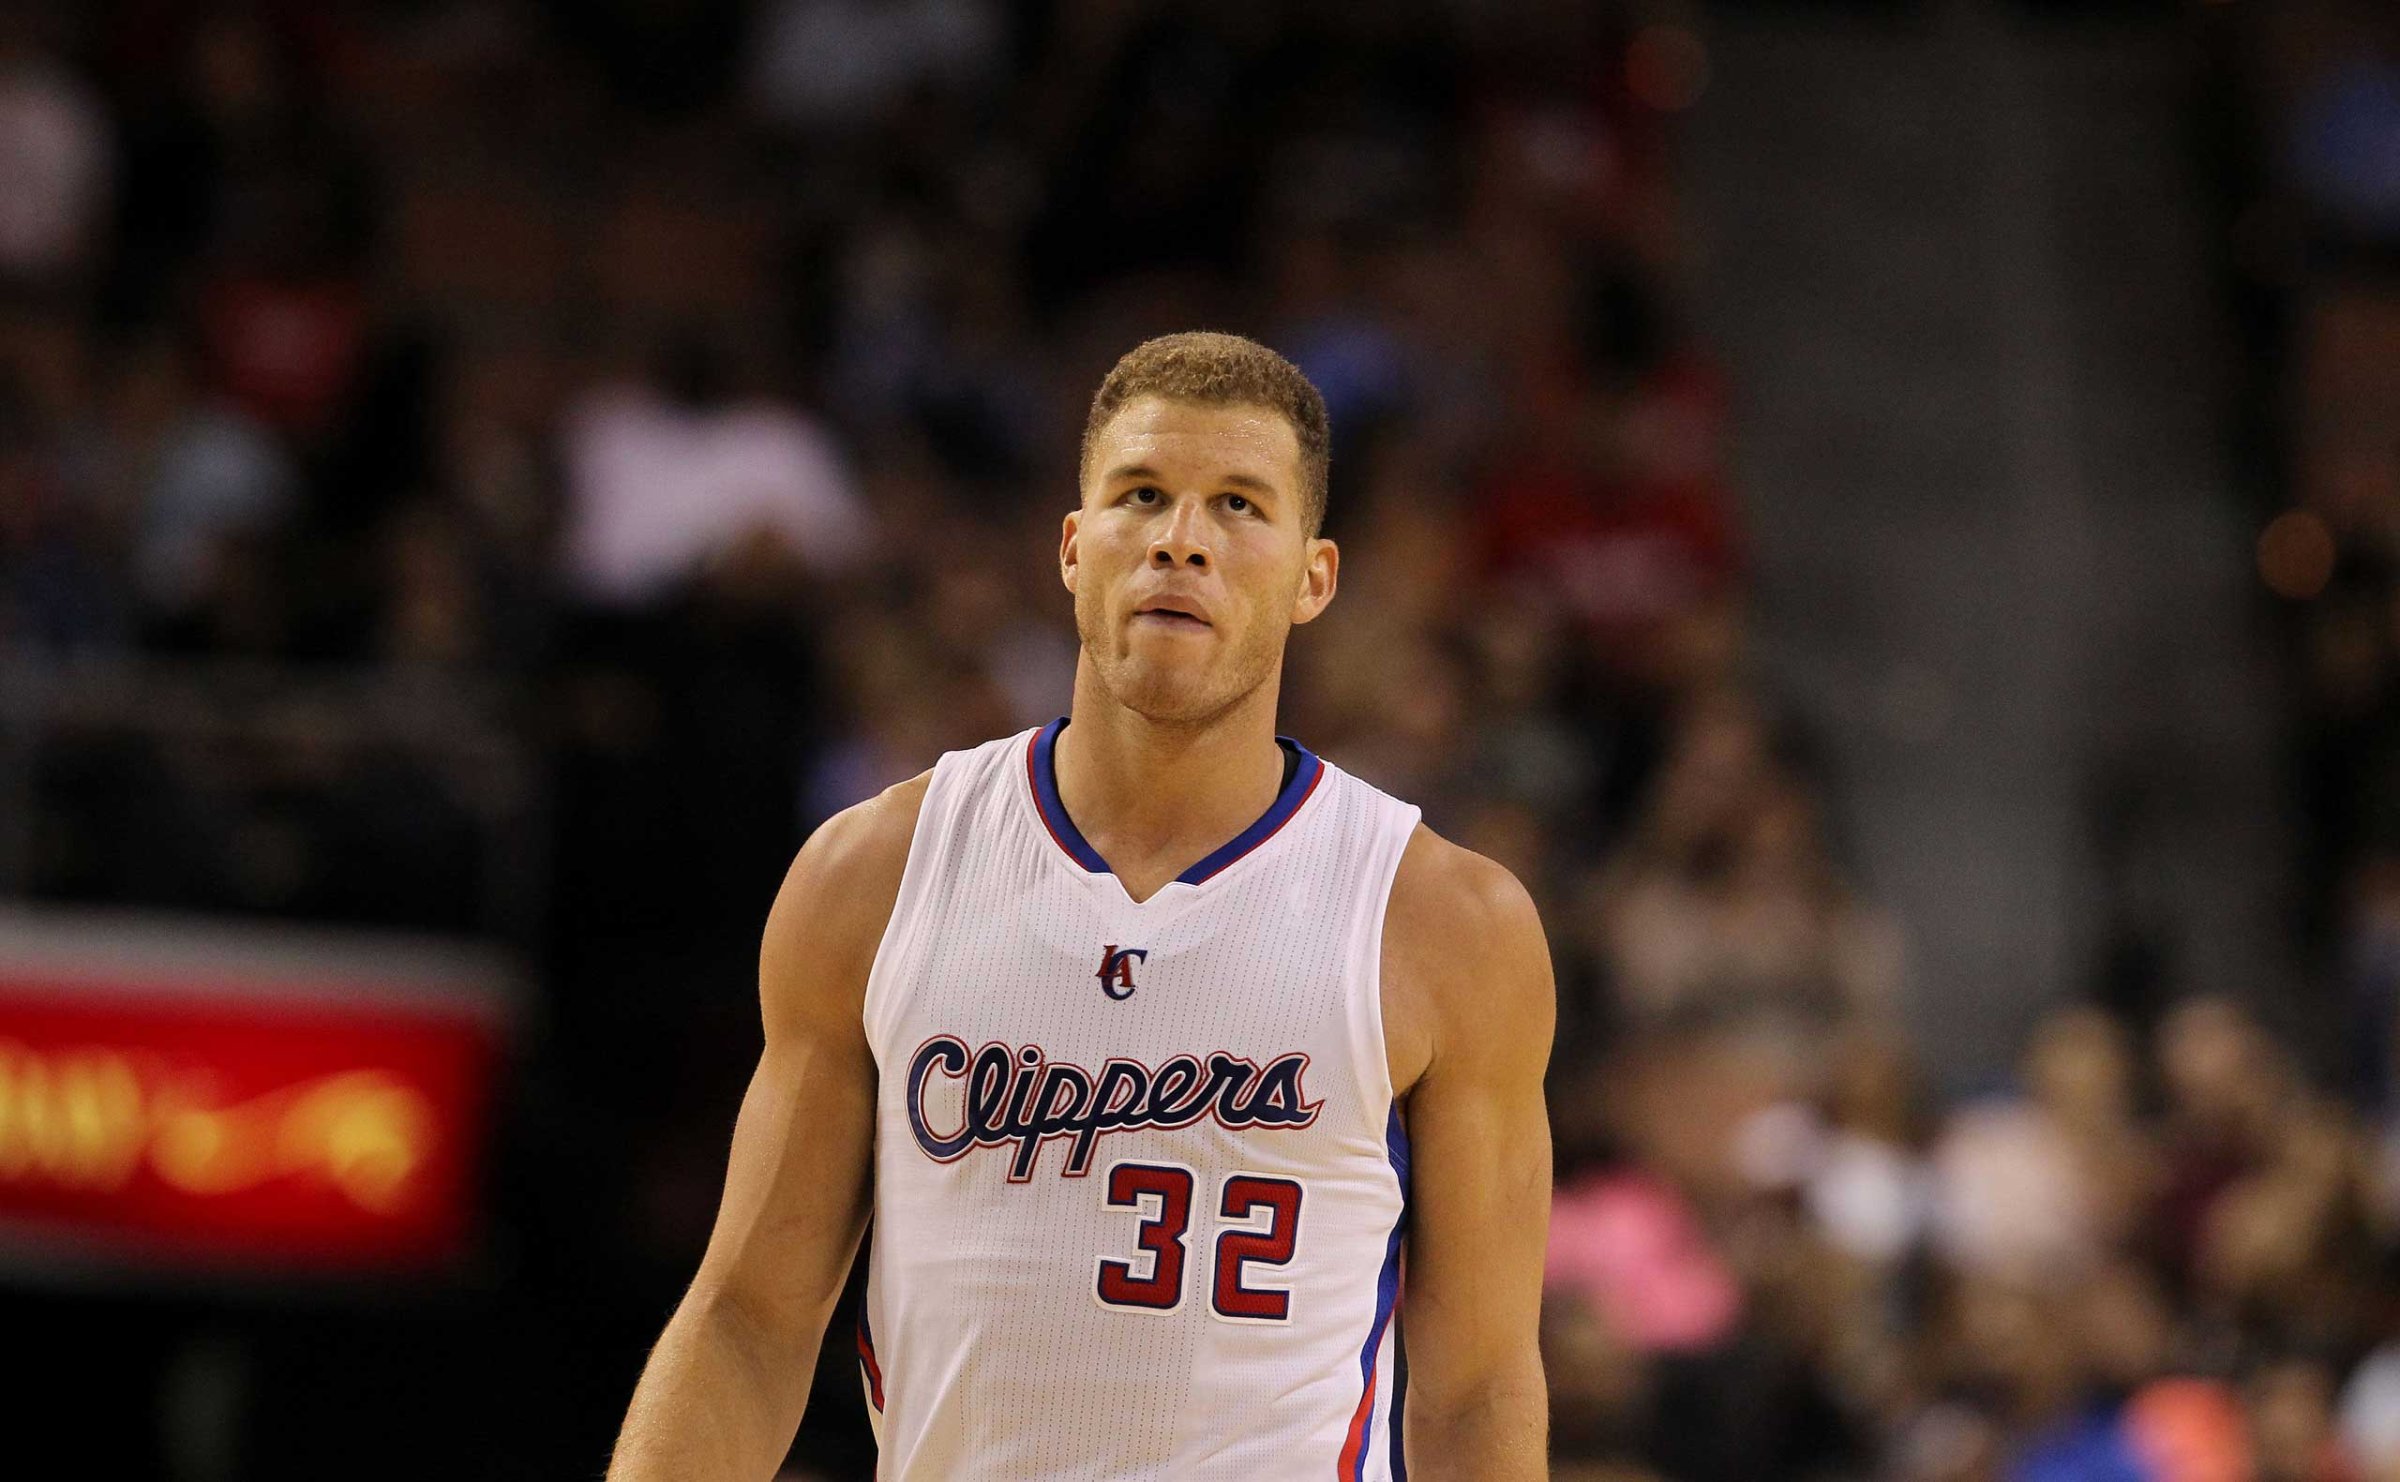 Los Angeles Clippers forward Blake Griffin during an NBA preseason game against the Denver Nuggets on Oct. 18, 2014, in Las Vegas.